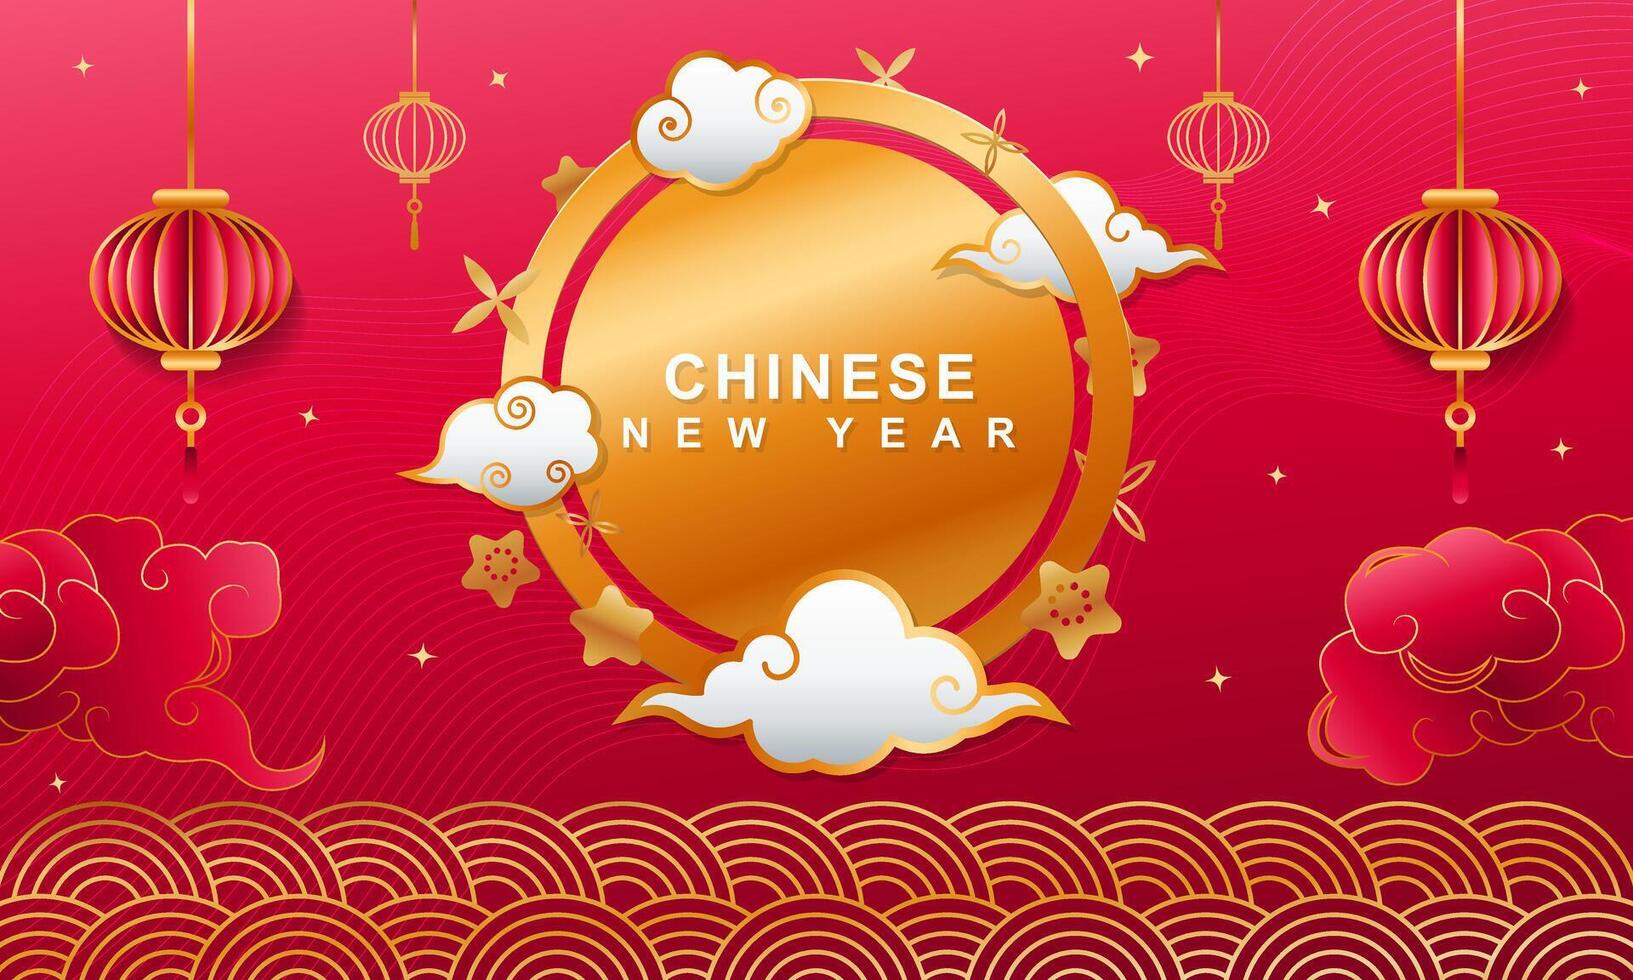 Chinese New Year celebration luxury background with golden circle border vector